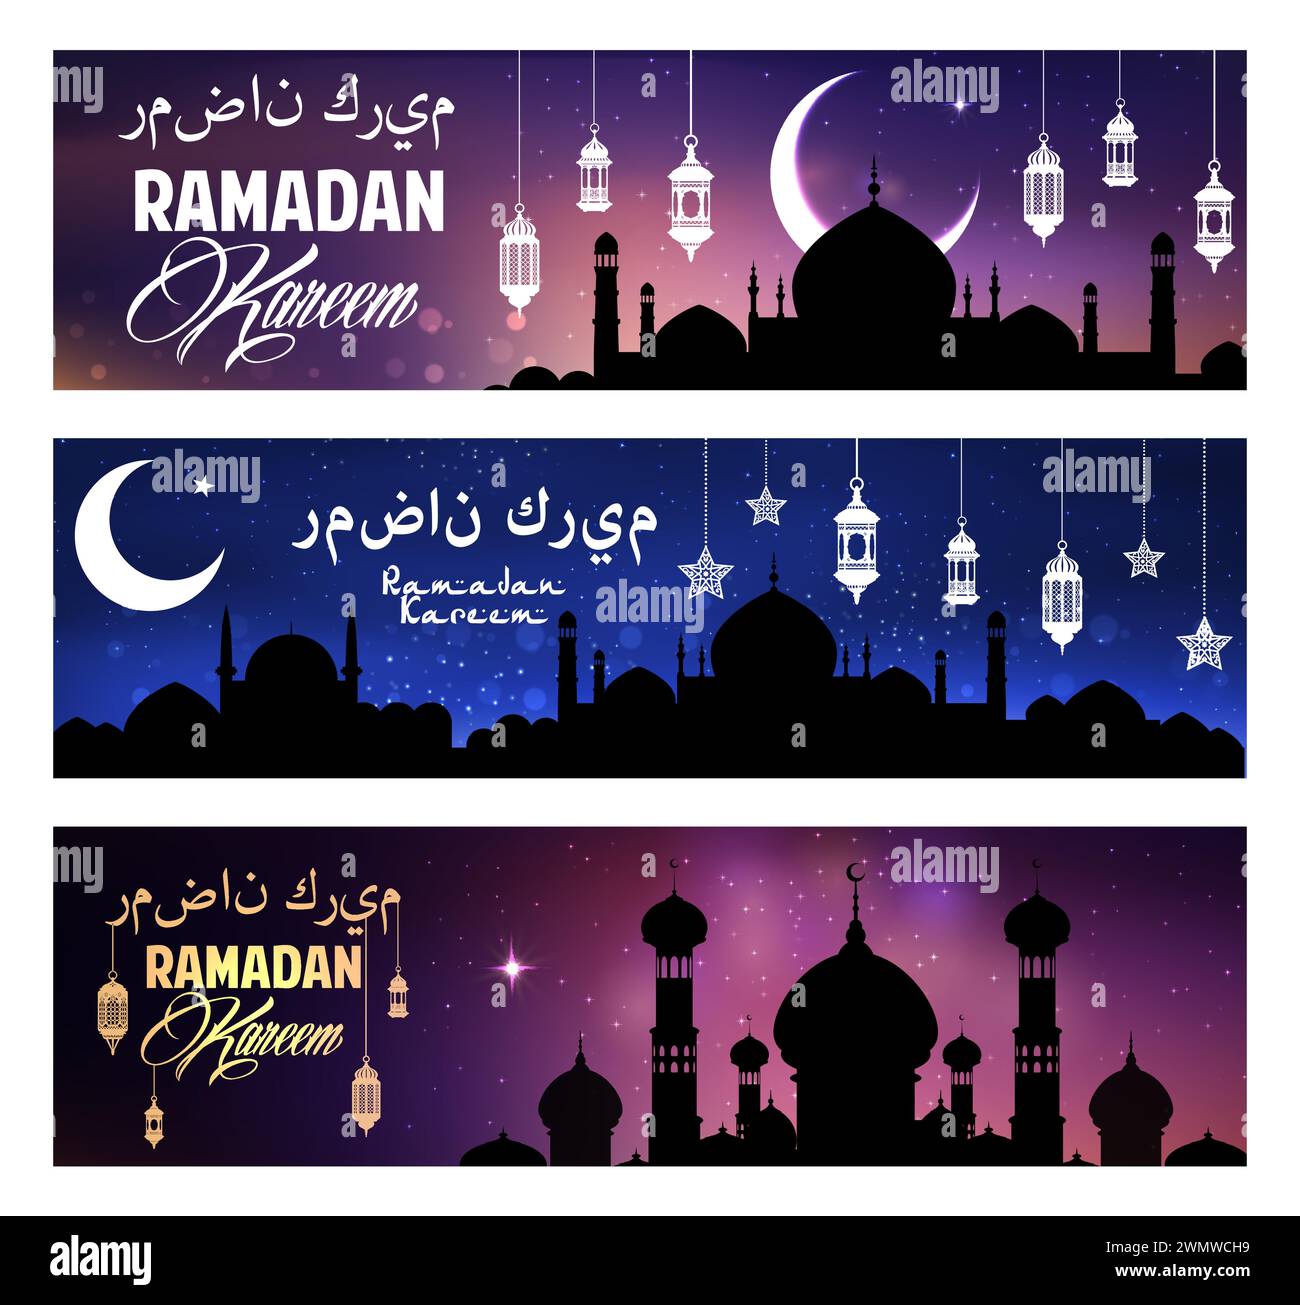 Ramadan Kareem greetings, Arabian city and Muslim mosque building with lanterns, vector banners. Islam religious holiday of Ramadan Kareem with greeting text in Arabic letters, crescent moon and stars Stock Vector